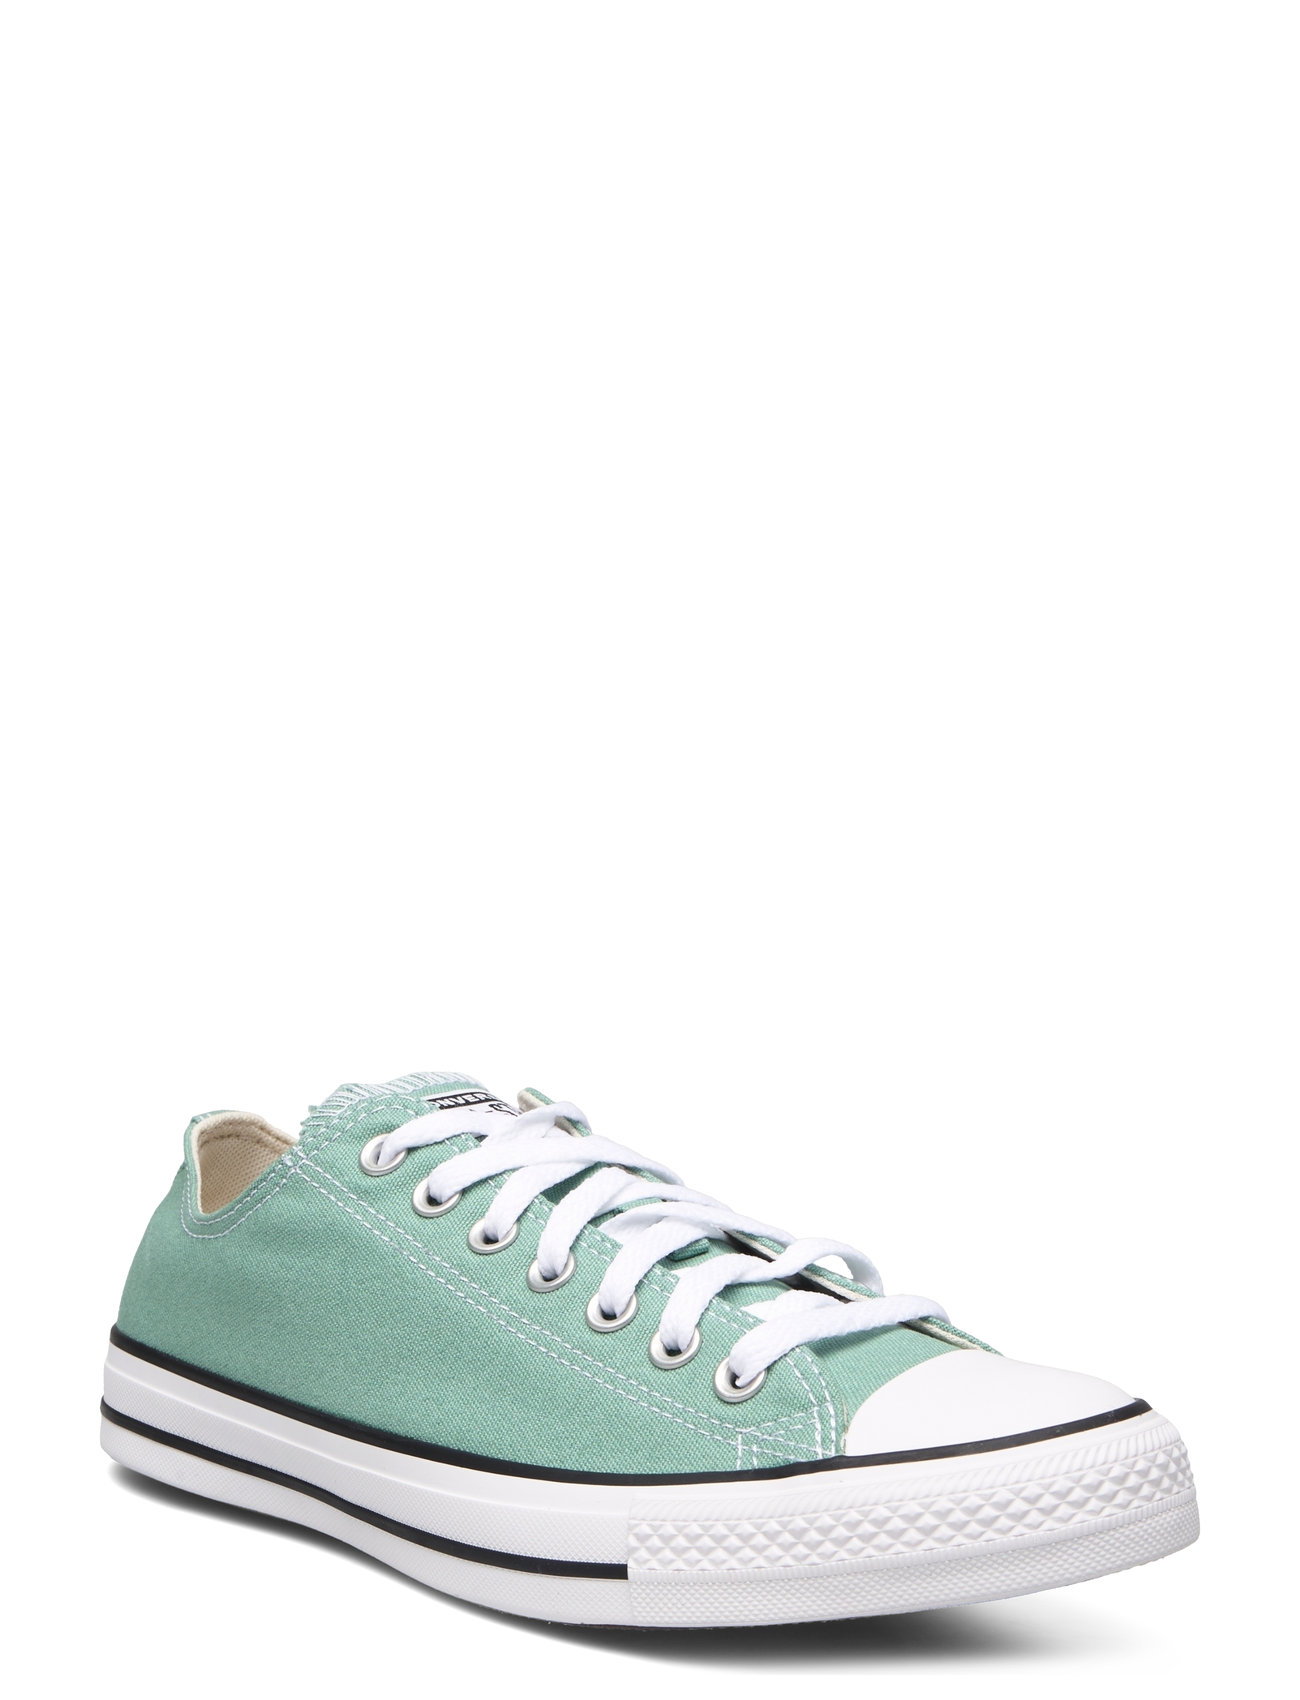 Converse "Chuck Taylor All Star Low-top Sneakers Green Converse"